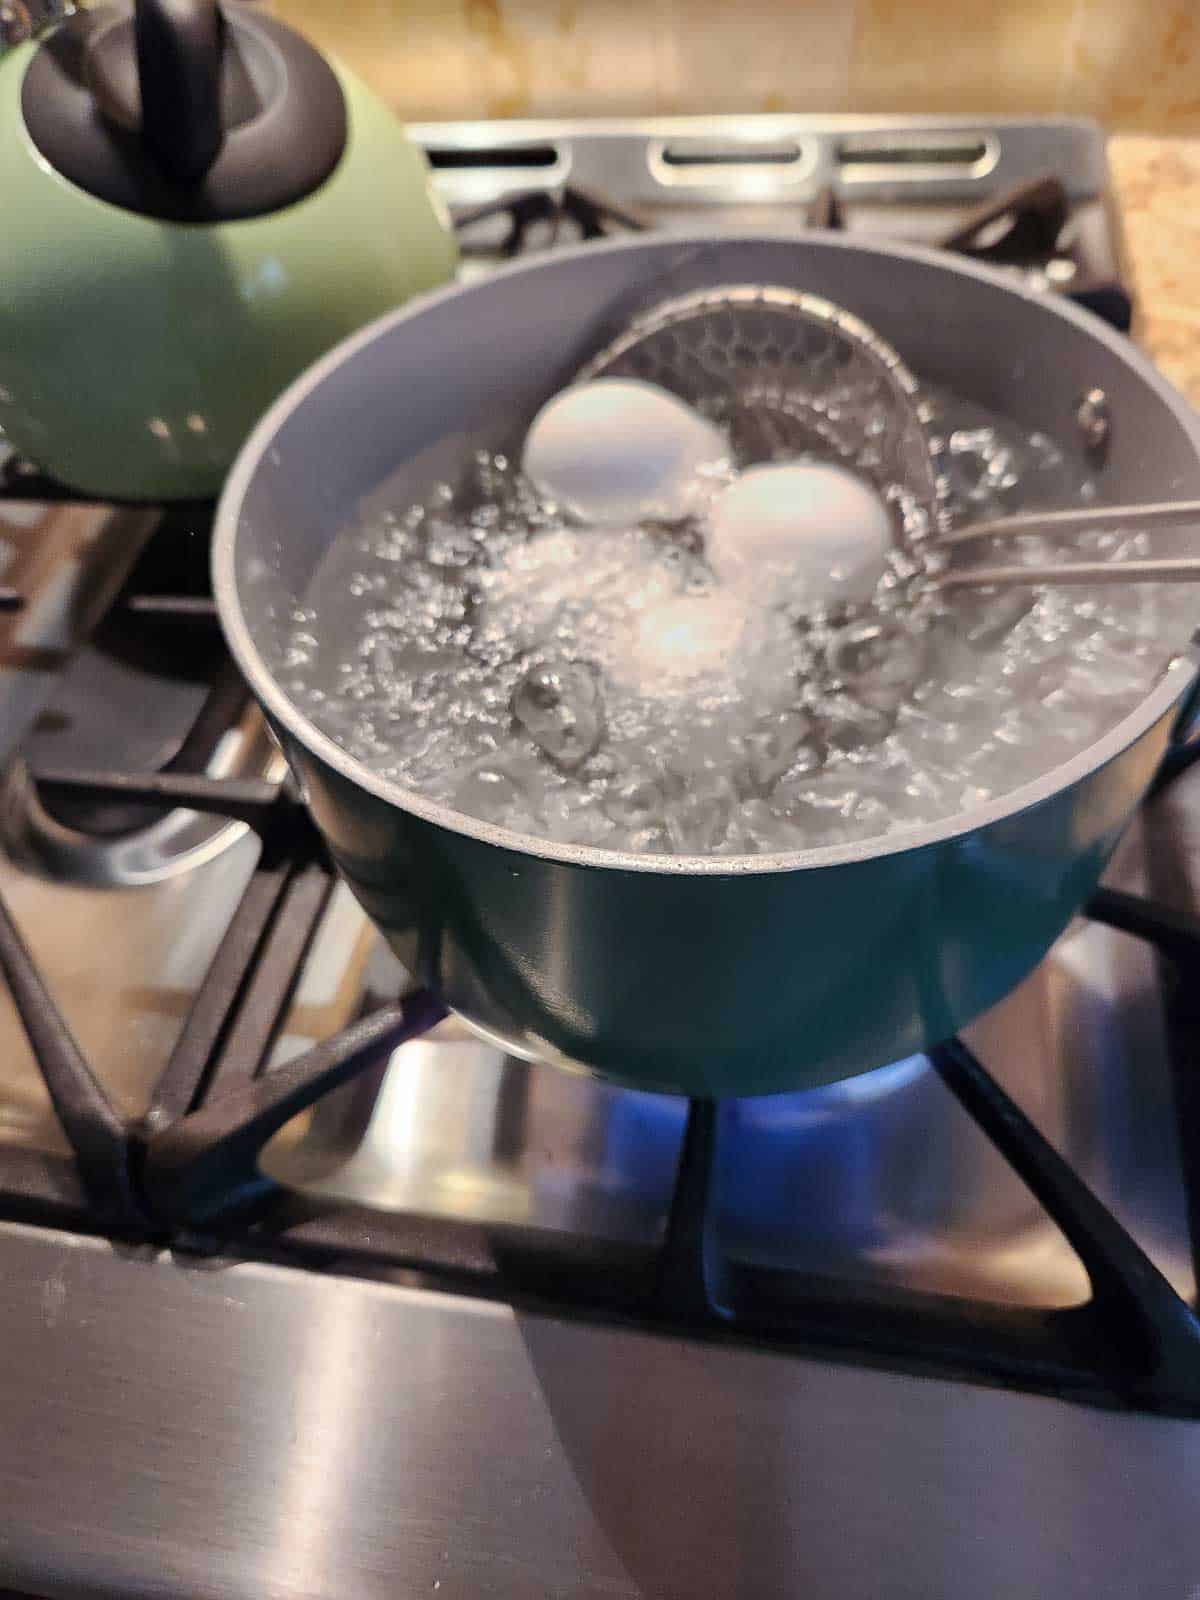 Eggs being placed in a pot of boiling water.